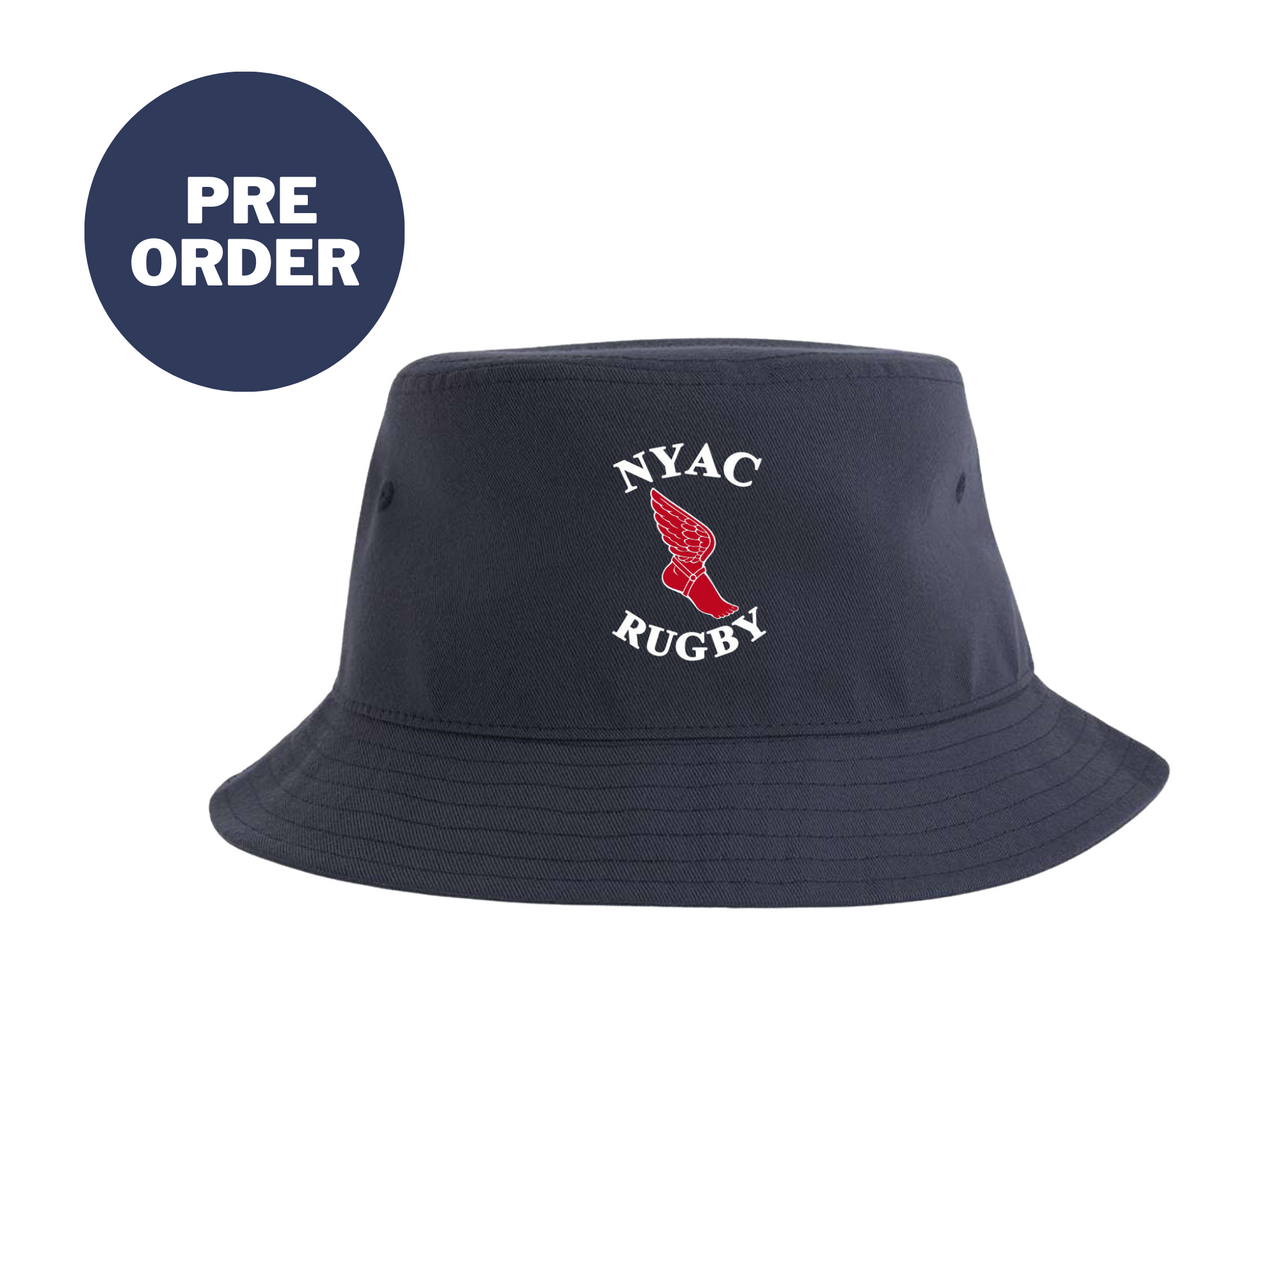 NYAC Rugby Bucket Hat